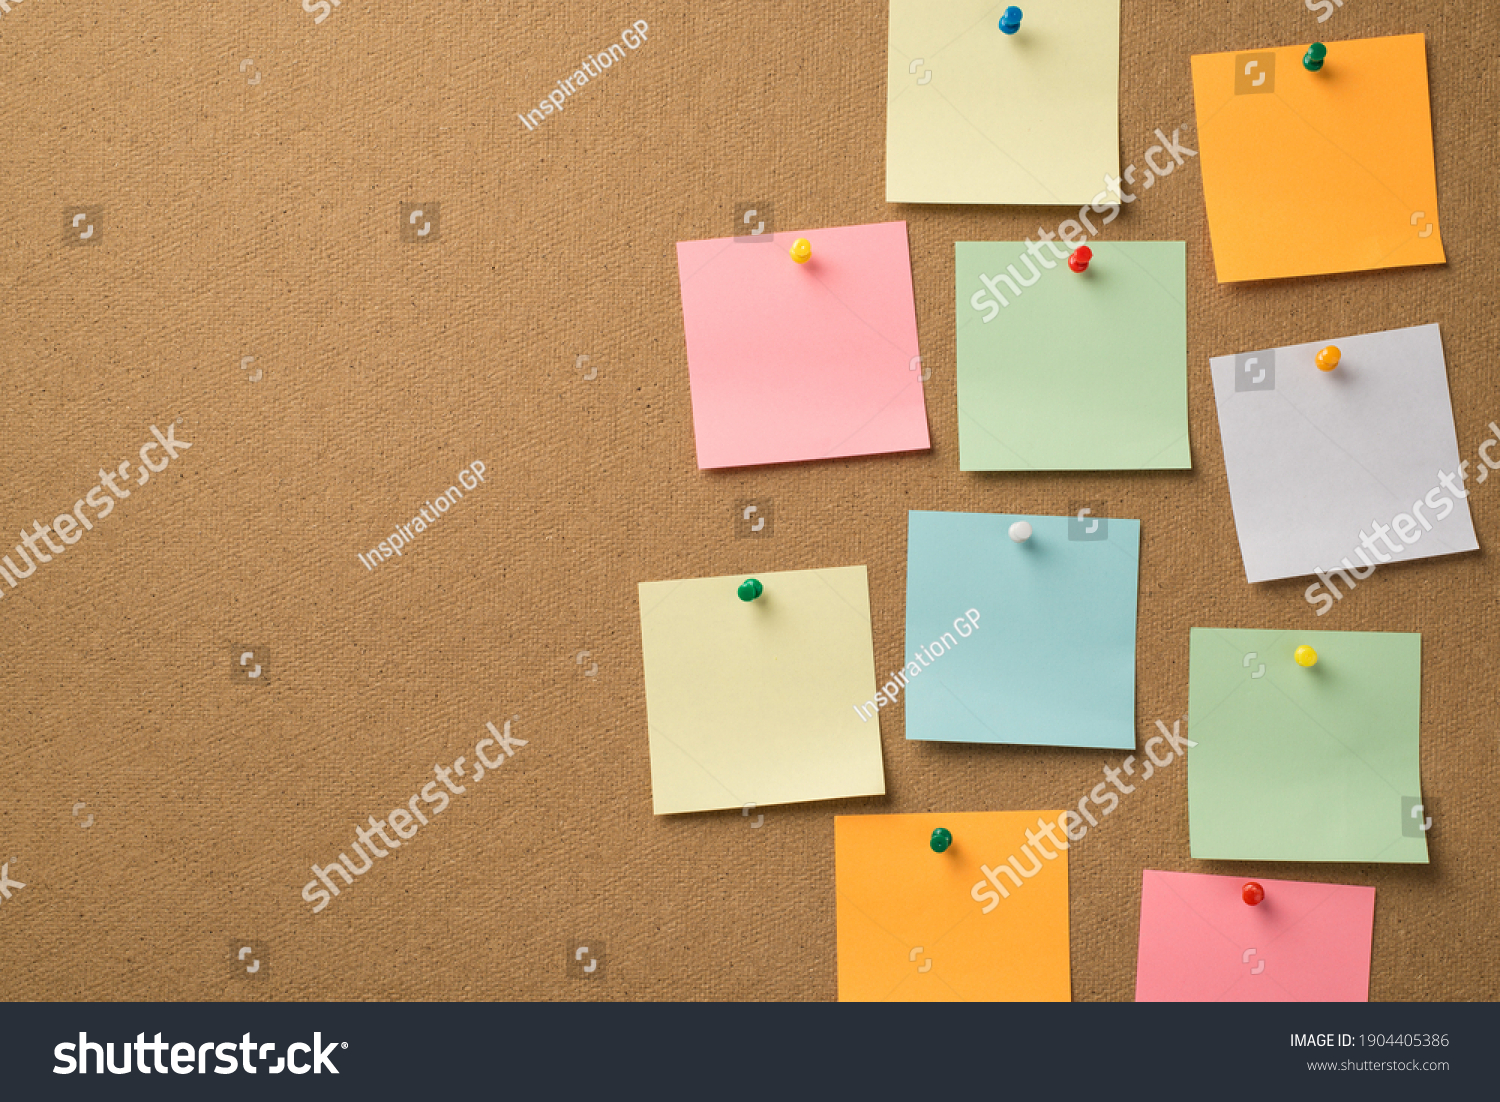 Busy day at work concept. Photo of lot of colorful notepaper attached with pins to the wooden board #1904405386